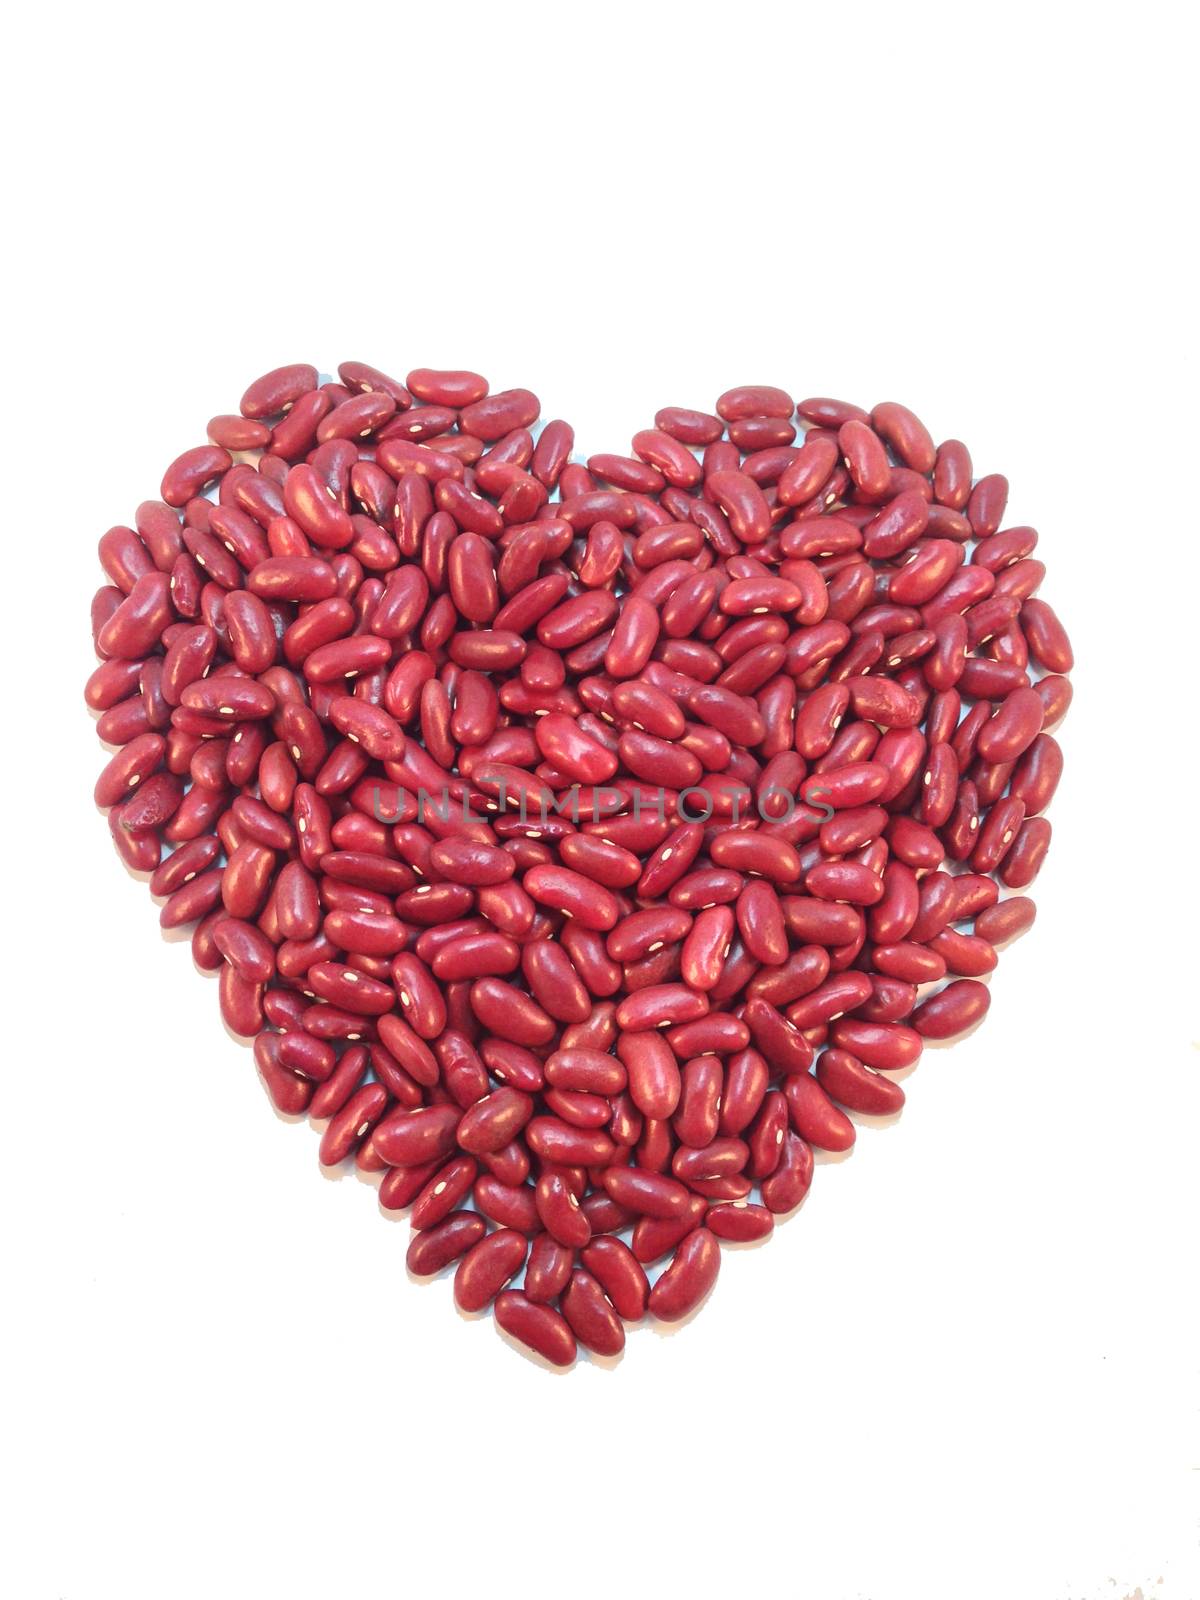 Heart shaped red bean on white background by Bowonpat